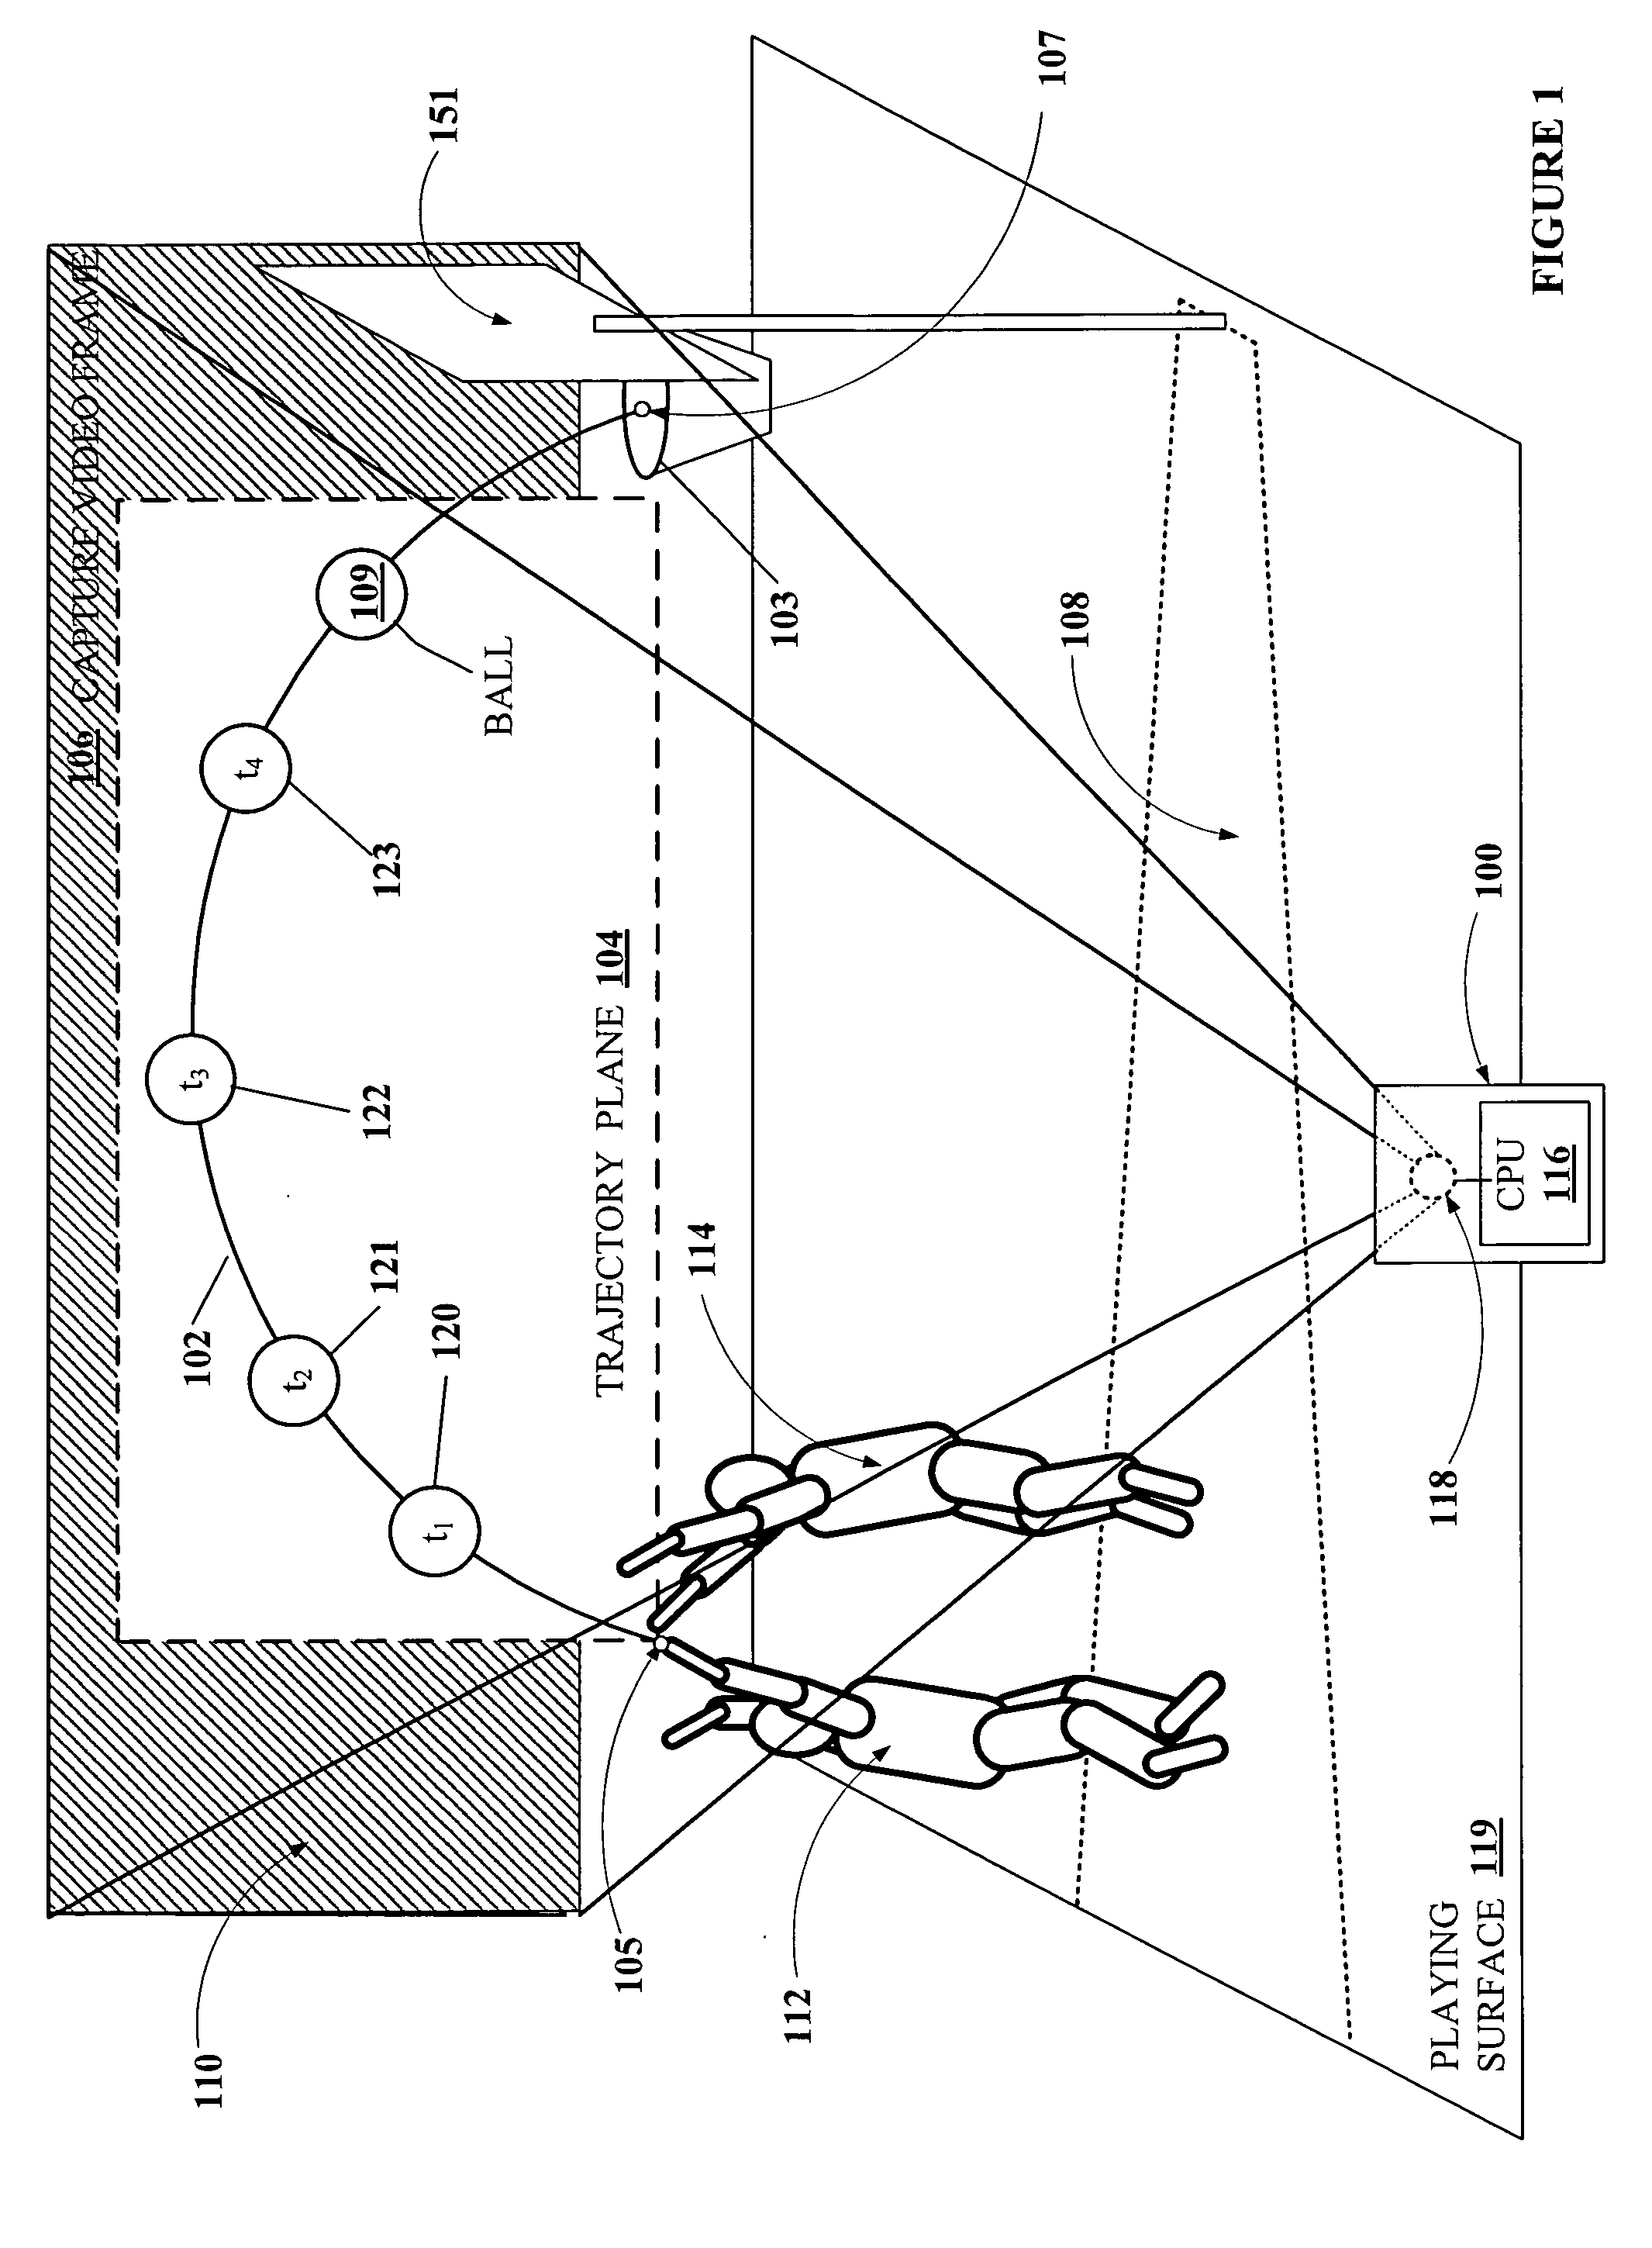 Trajectory detection and feedback system